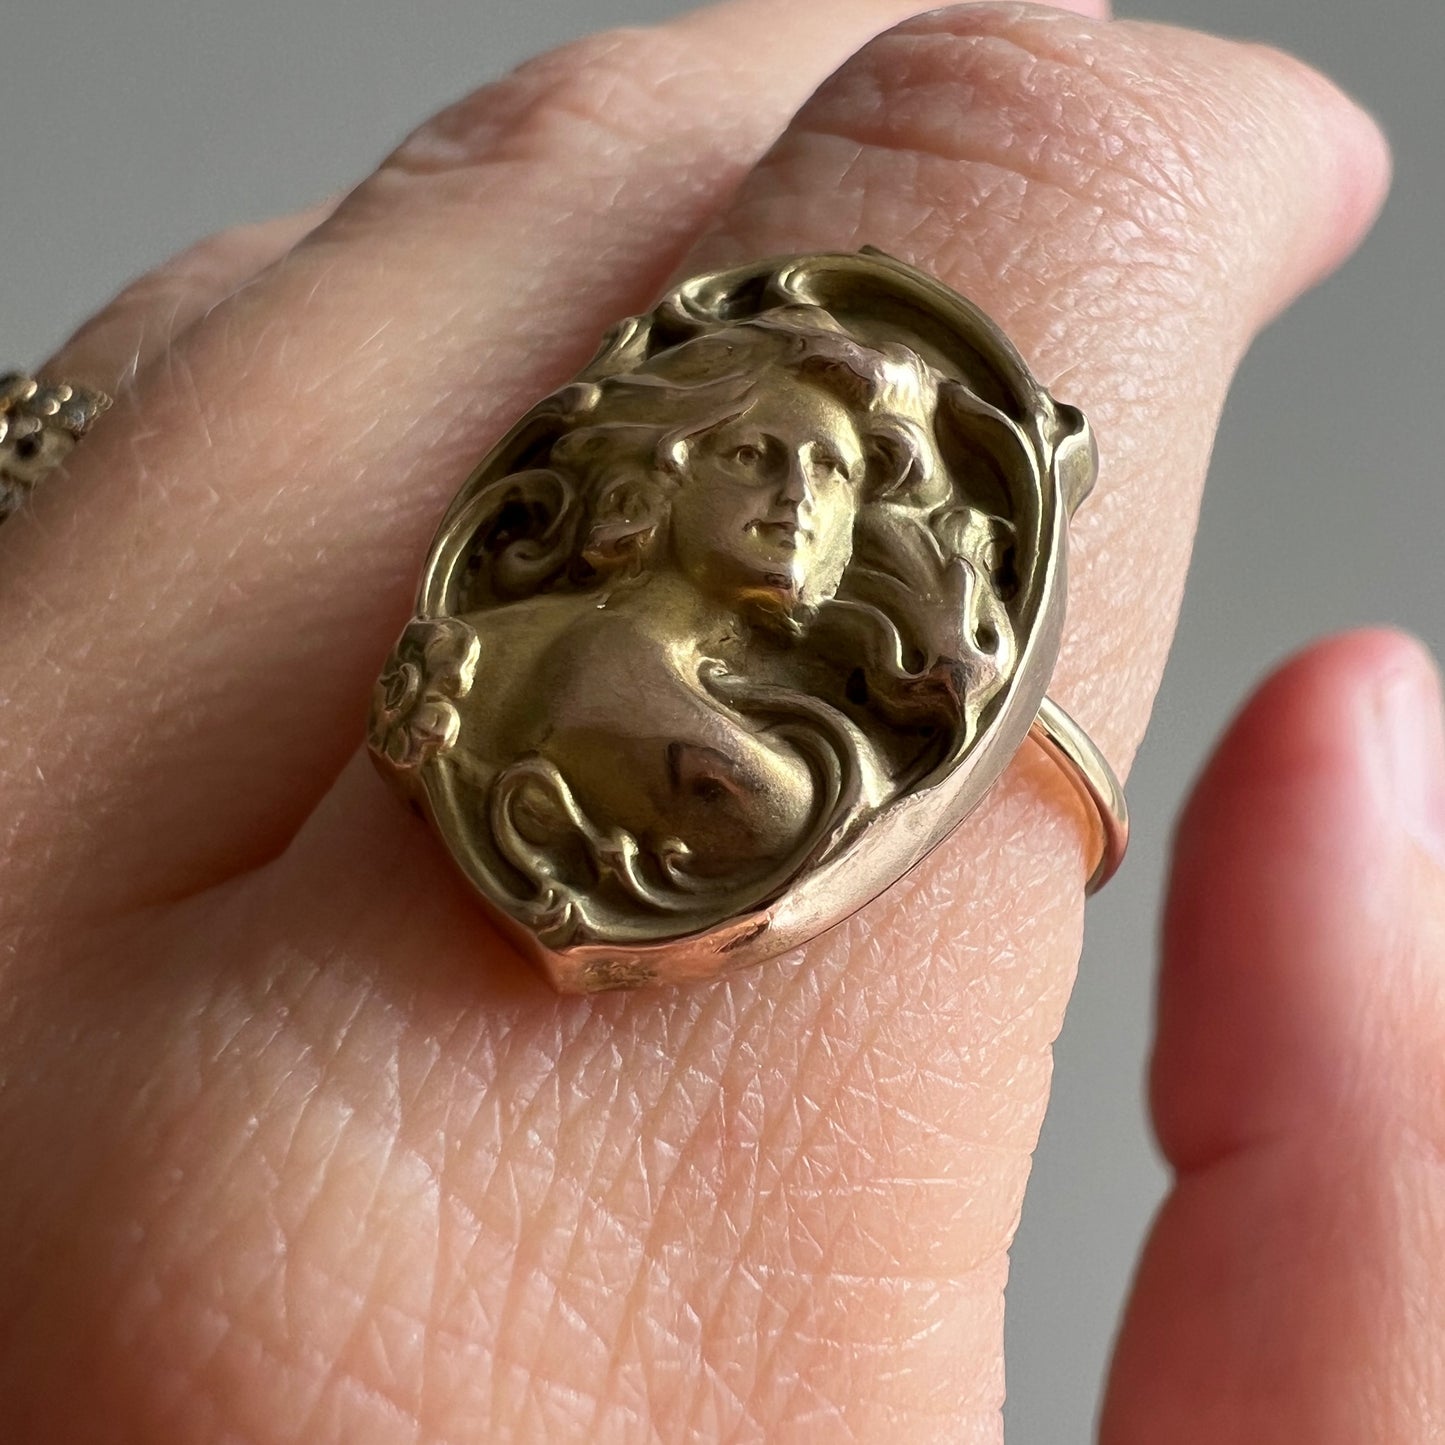 reimagined V I N T A G E // the girl and the tulip / 10k yellow gold art nouveau cufflink conversion ring / size 7